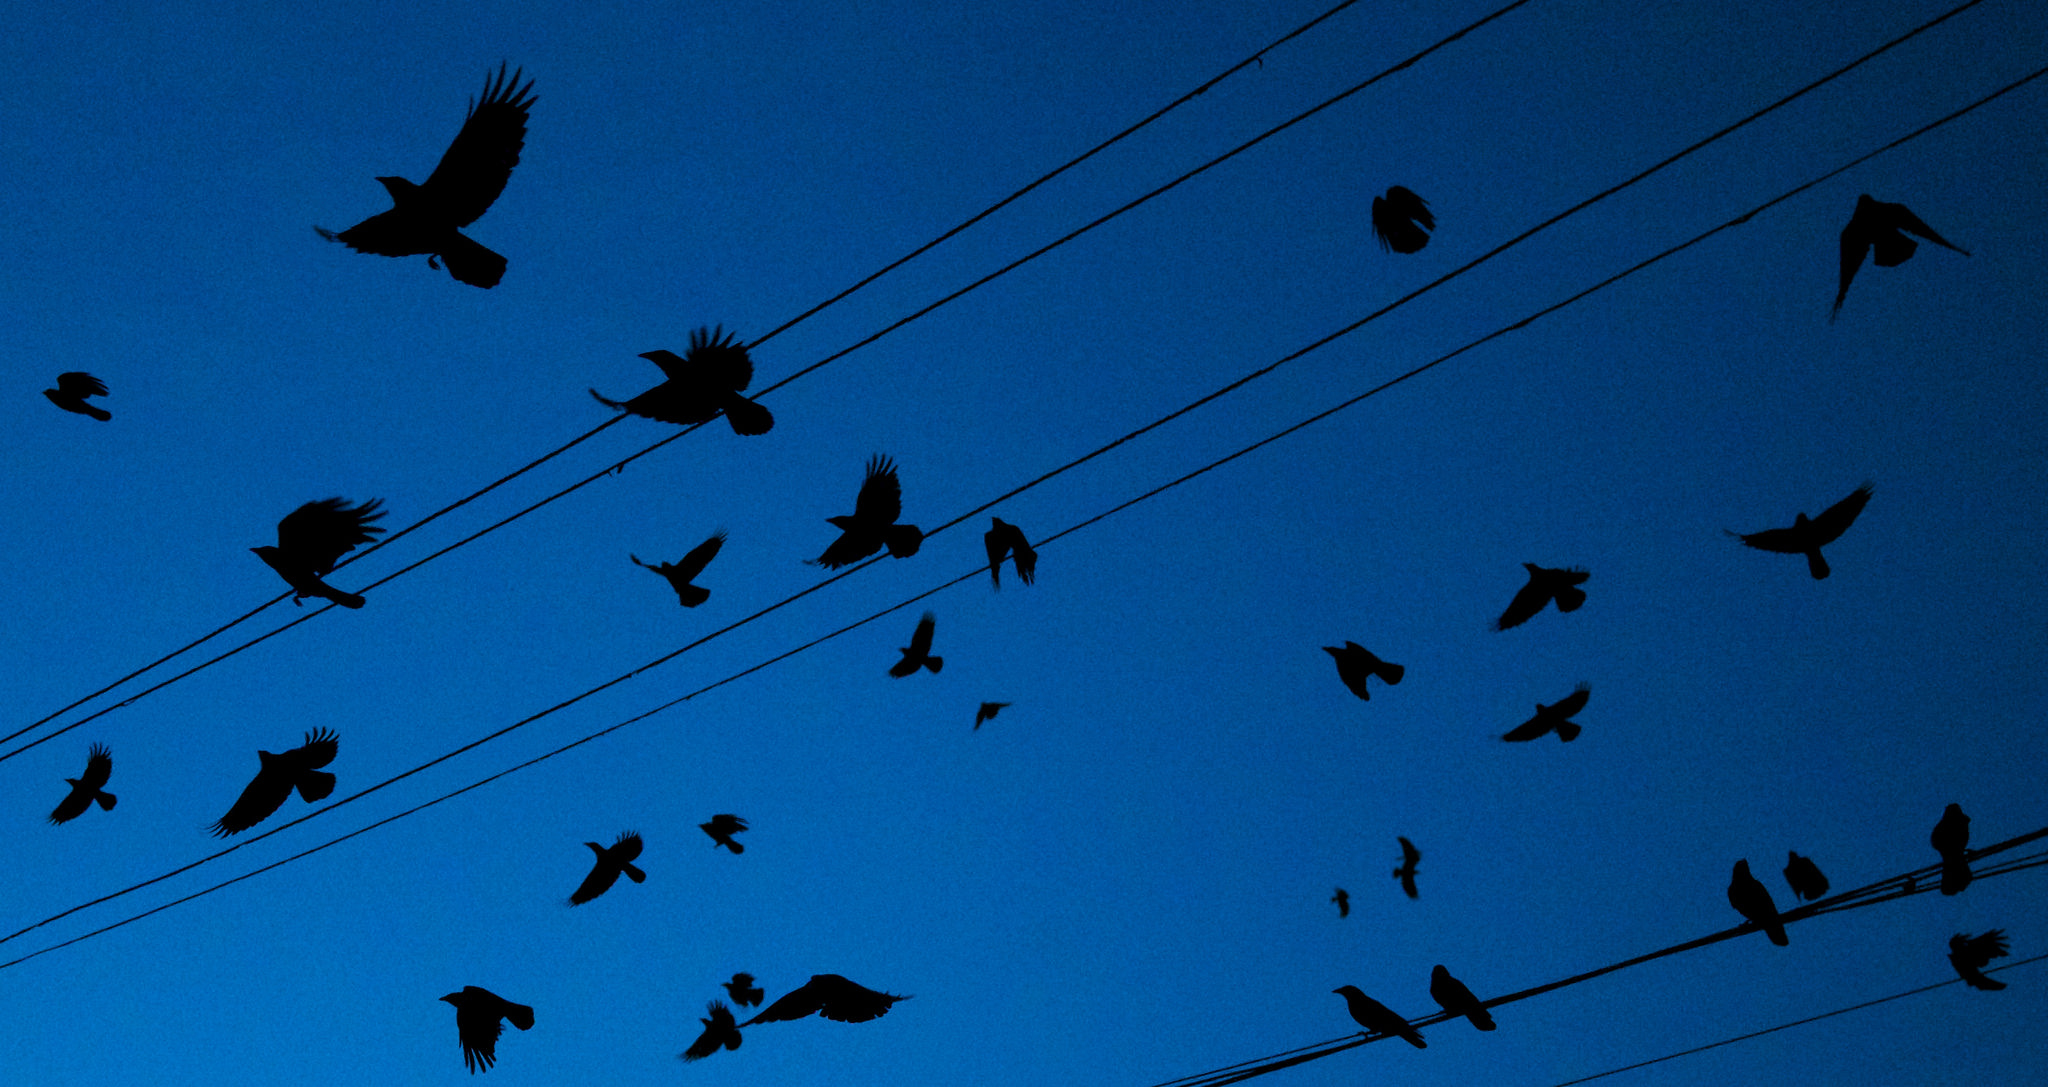 Crows leaving downtown Bothell, WA, for their roosting grounds at UW Bothell. Photo © Old Mister Crow / Flickr through a Creative Commons license